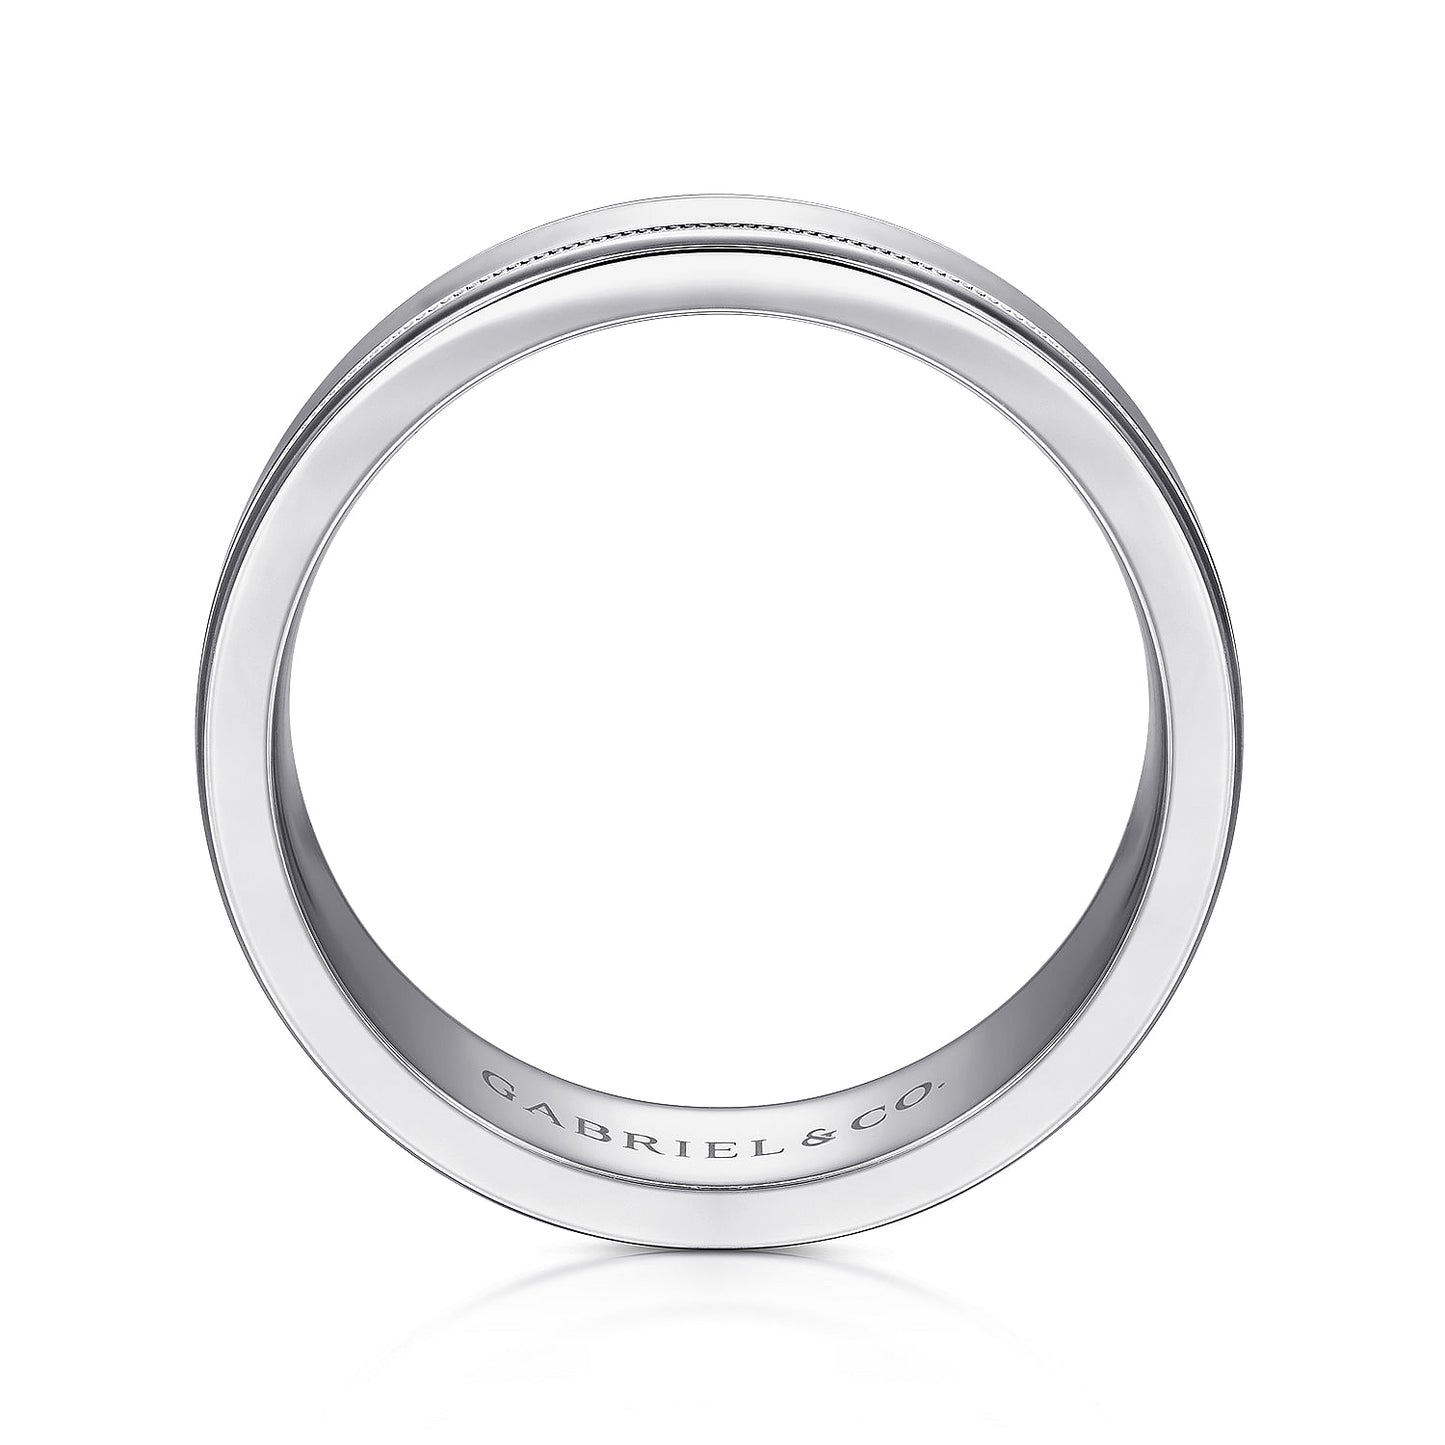 Gabriel & Co White Gold Wedding Band With A Polished Center, Milgrain Trim And Polished Edges - Gold Wedding Bands - Men's